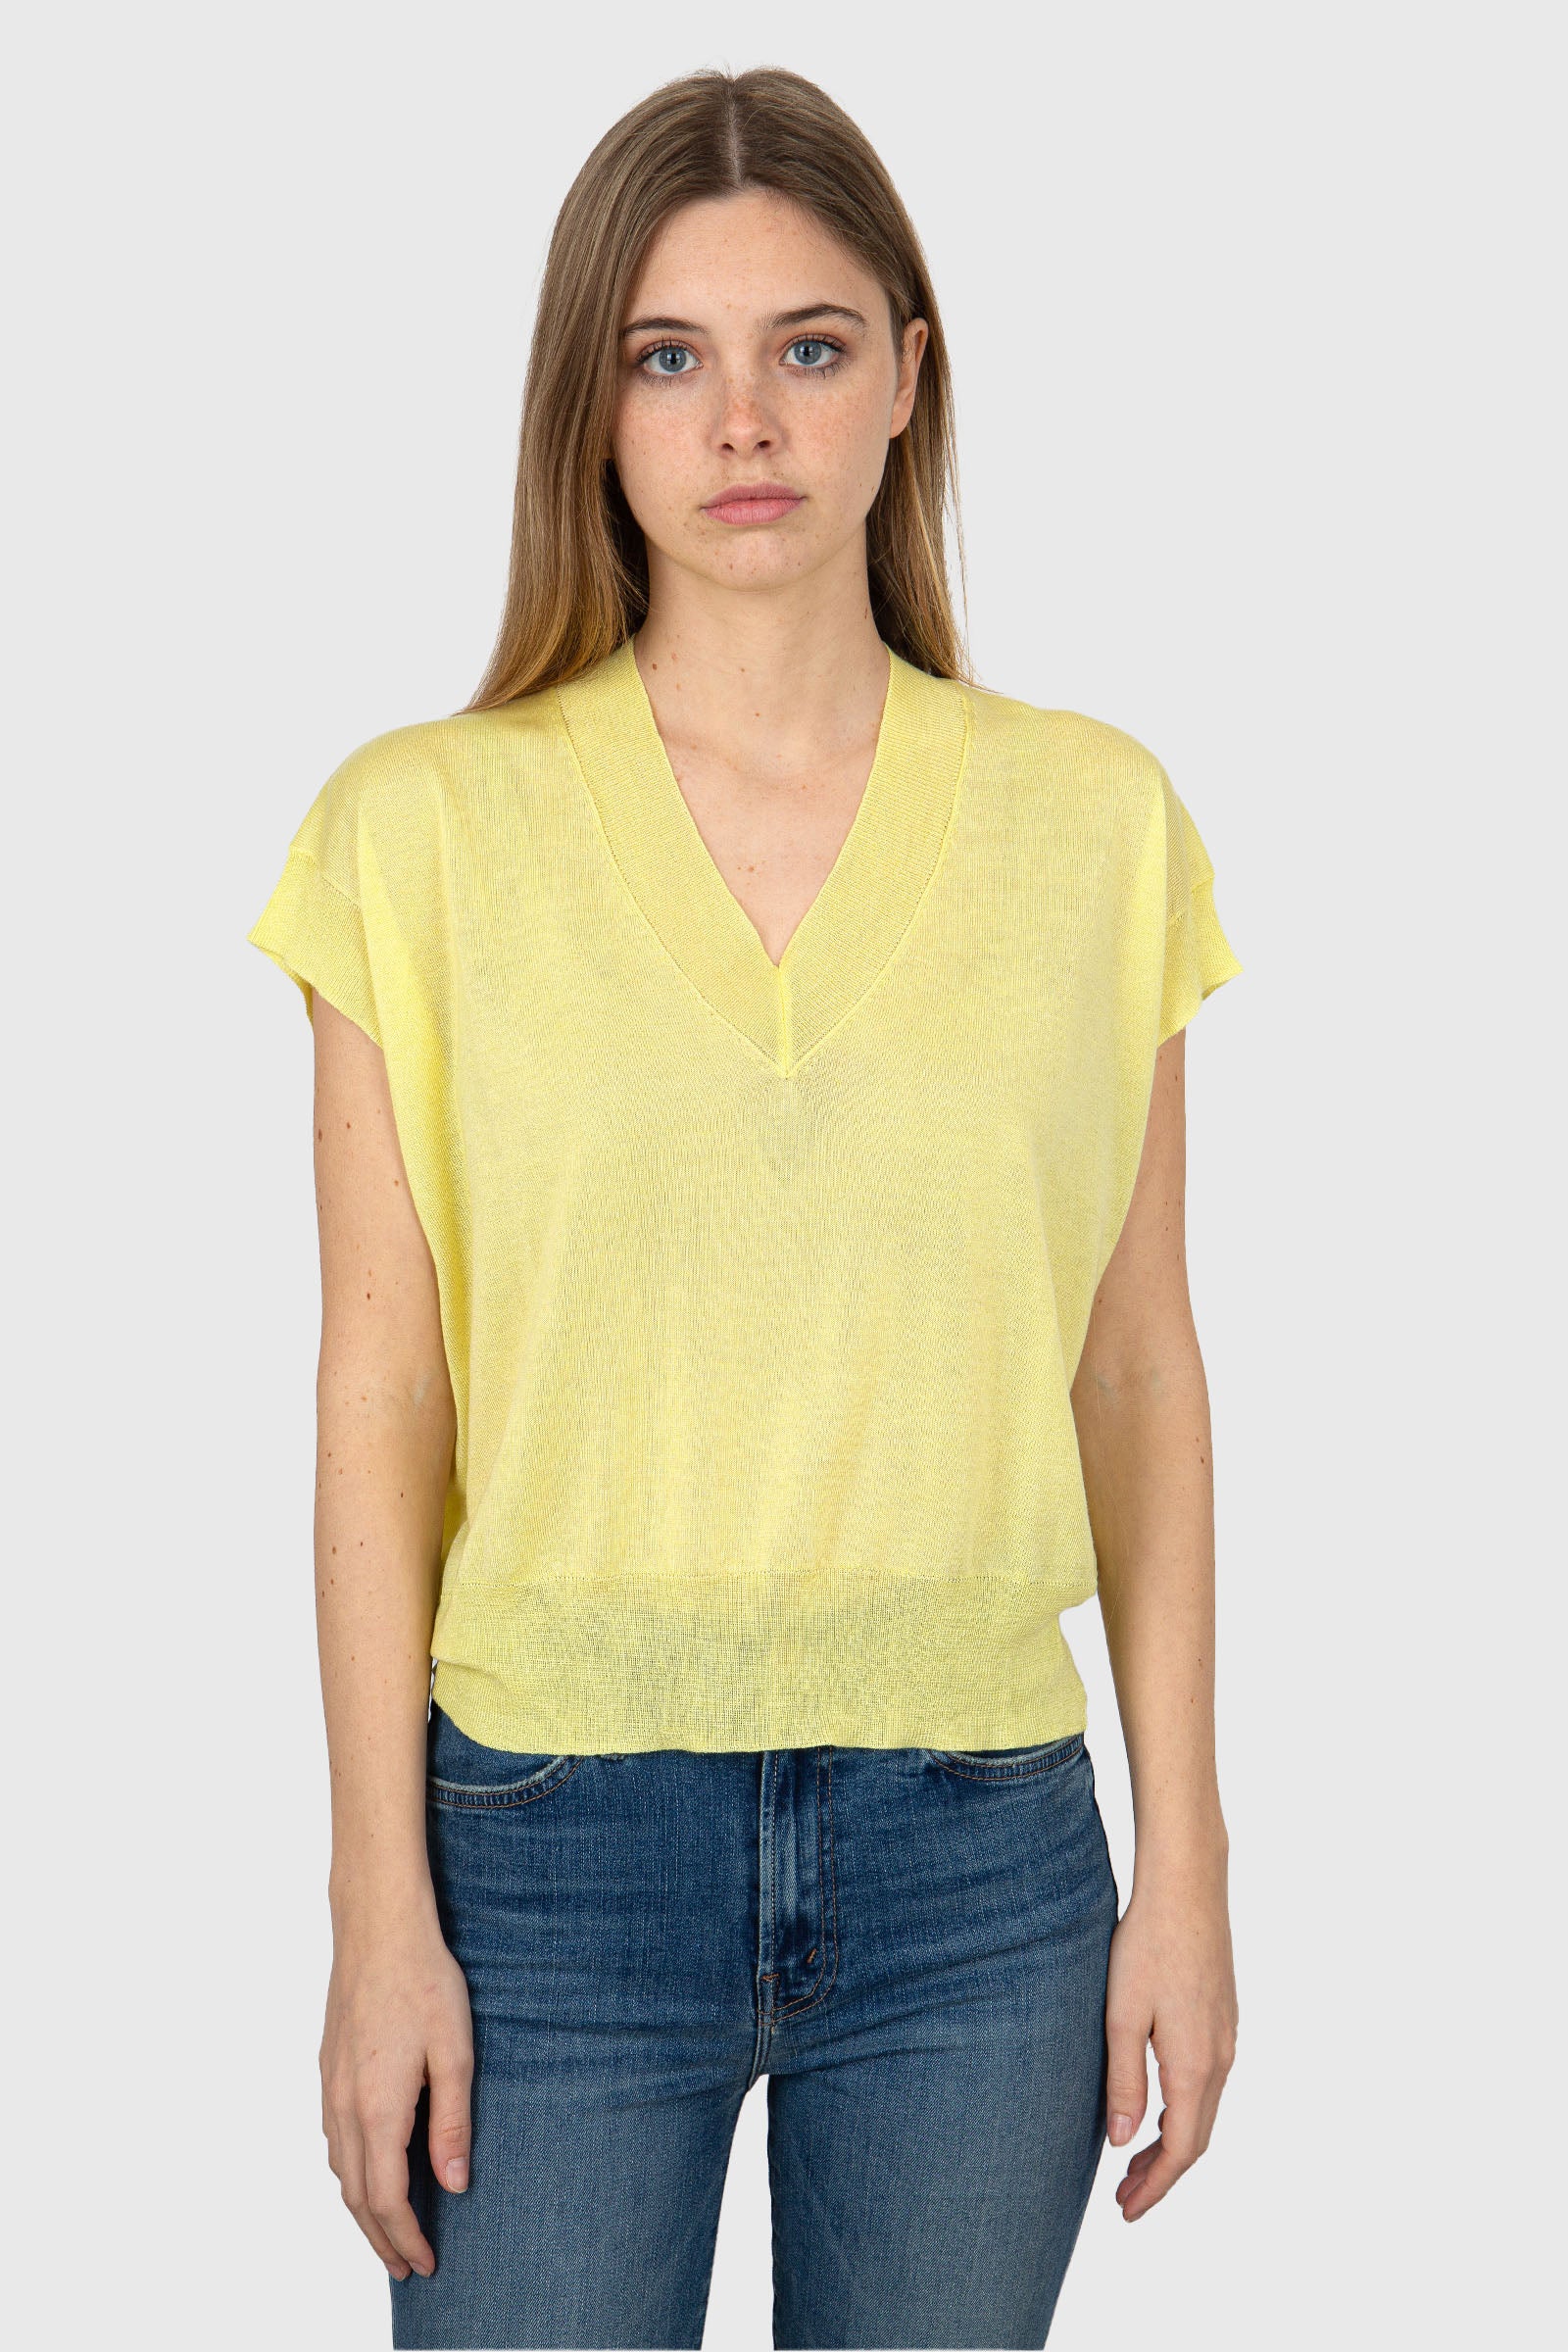 Absolut Cashmere Blair Synthetic Yellow Sweater - 5